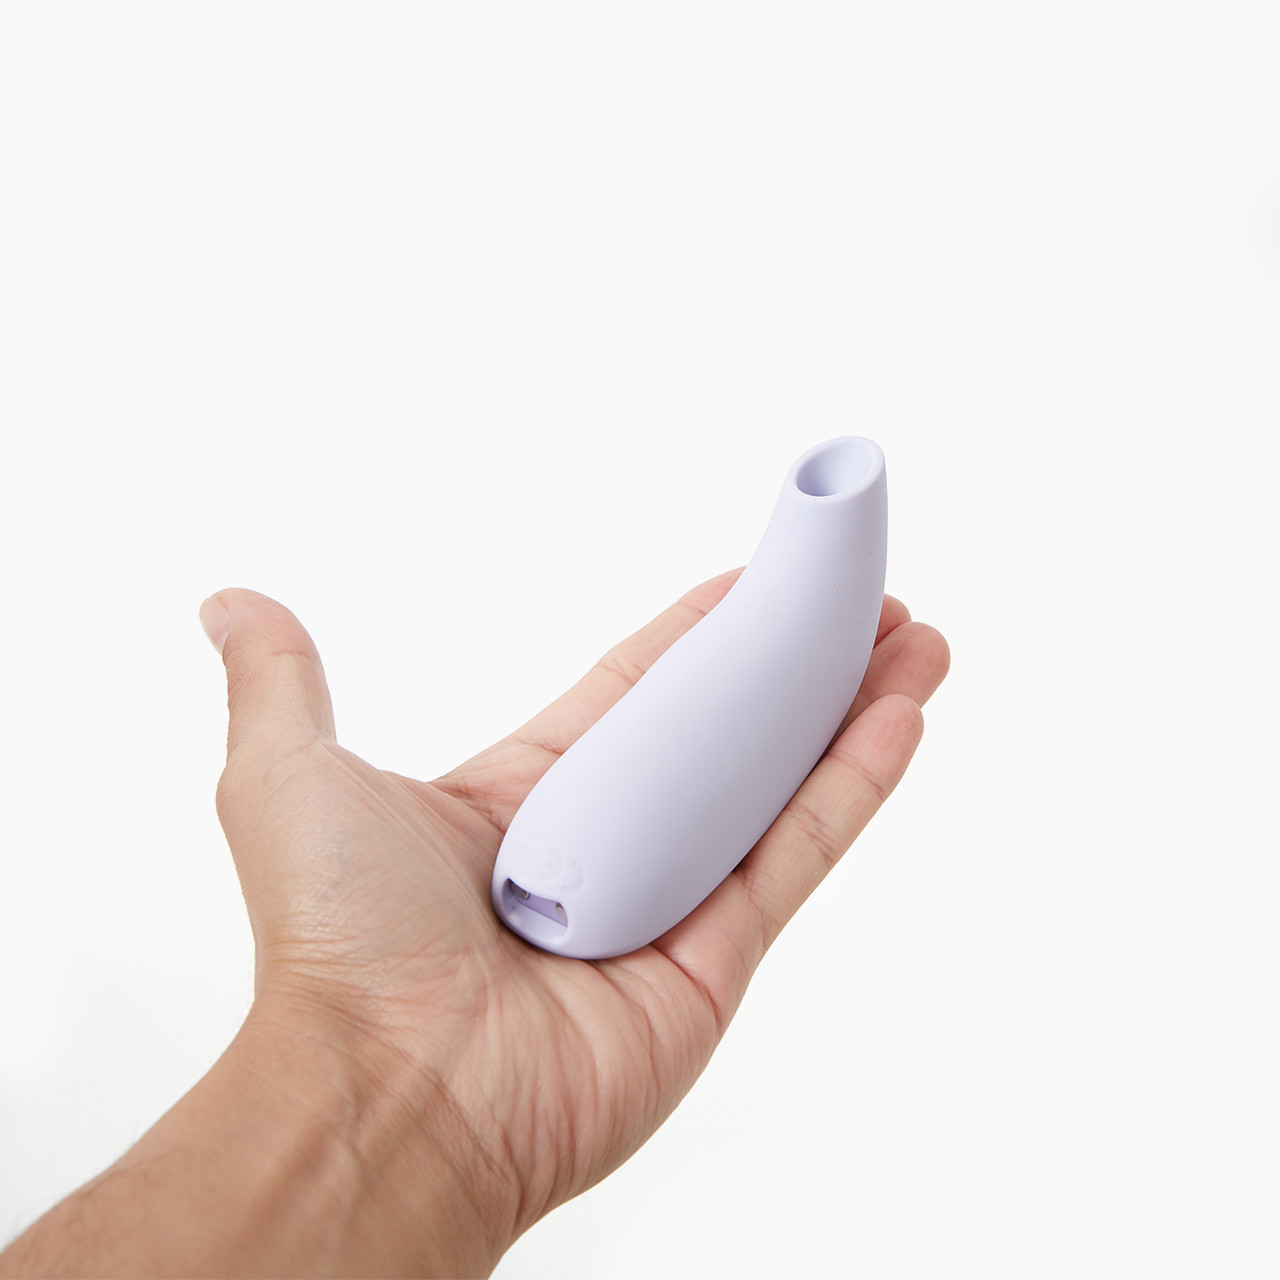 Dame Aer suction toy held in hand